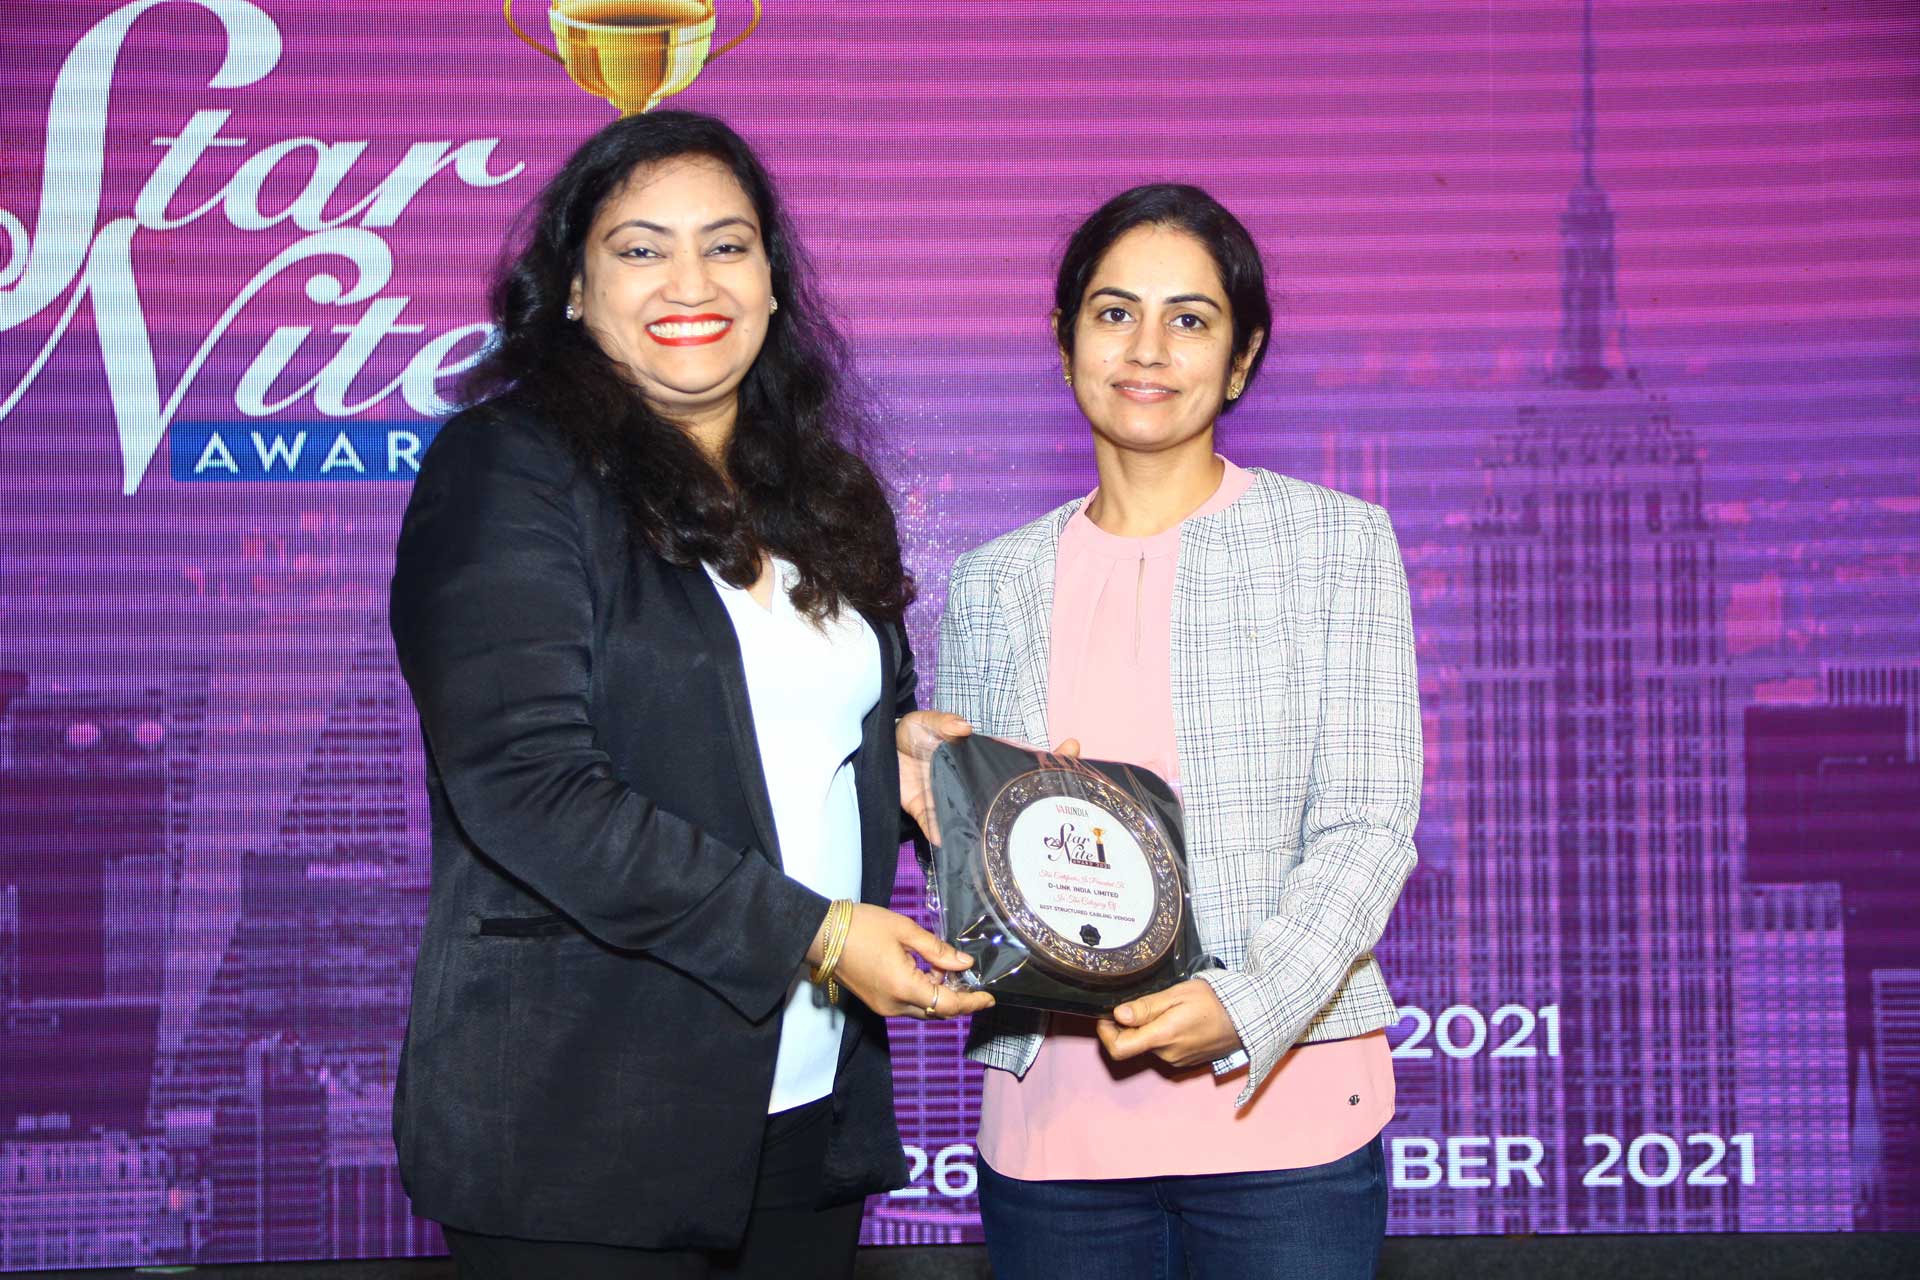 Best Structured Cabling Vendor Company Award goes to D-LINK India Limited at 20th Star Nite Awards 2021